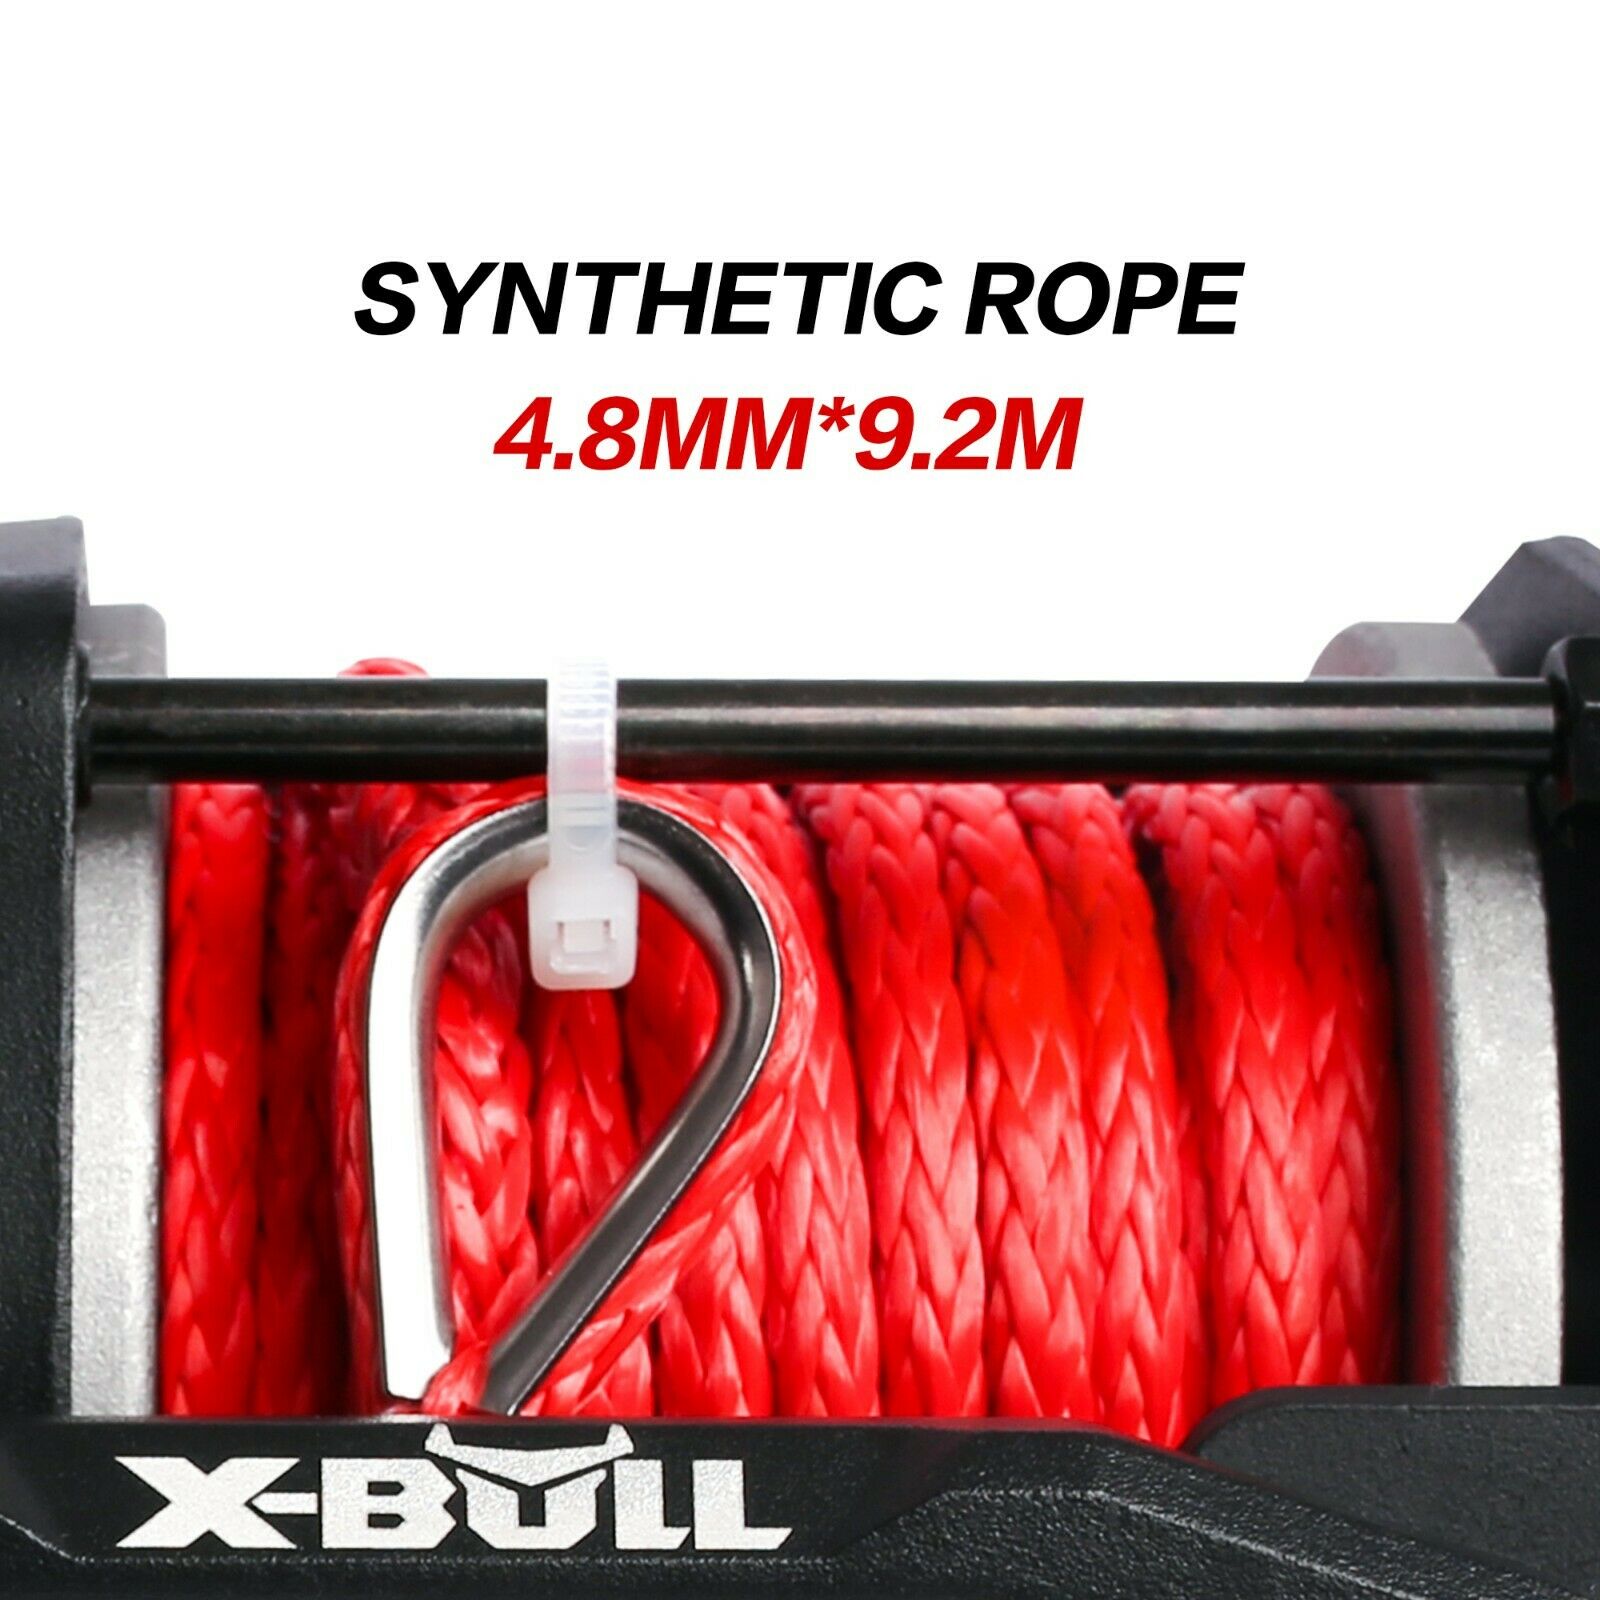 X-BULL Electric Winch 12V Wireless 3000lbs/1360kg Synthetic Rope BOAT ATV 4WD Deals499